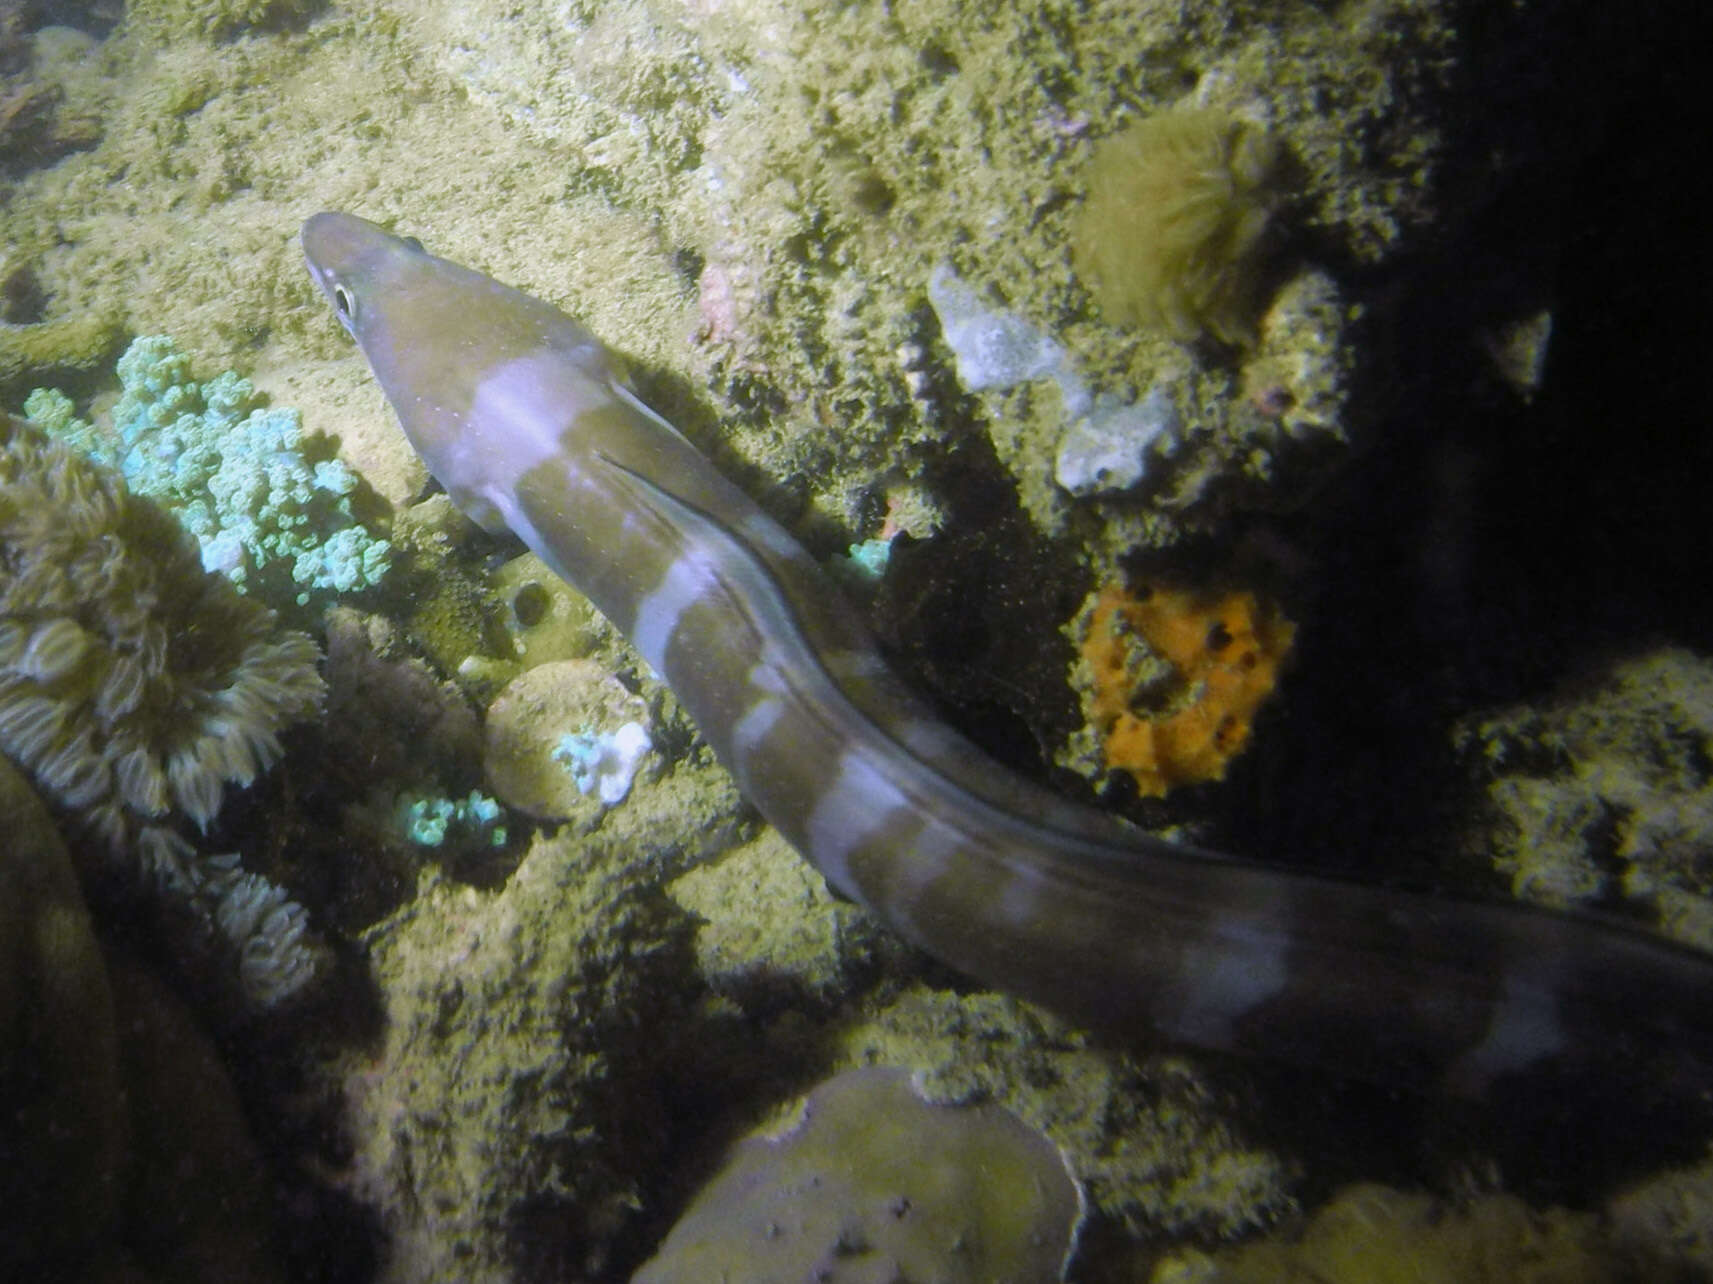 Image of Ash-colored conger eel